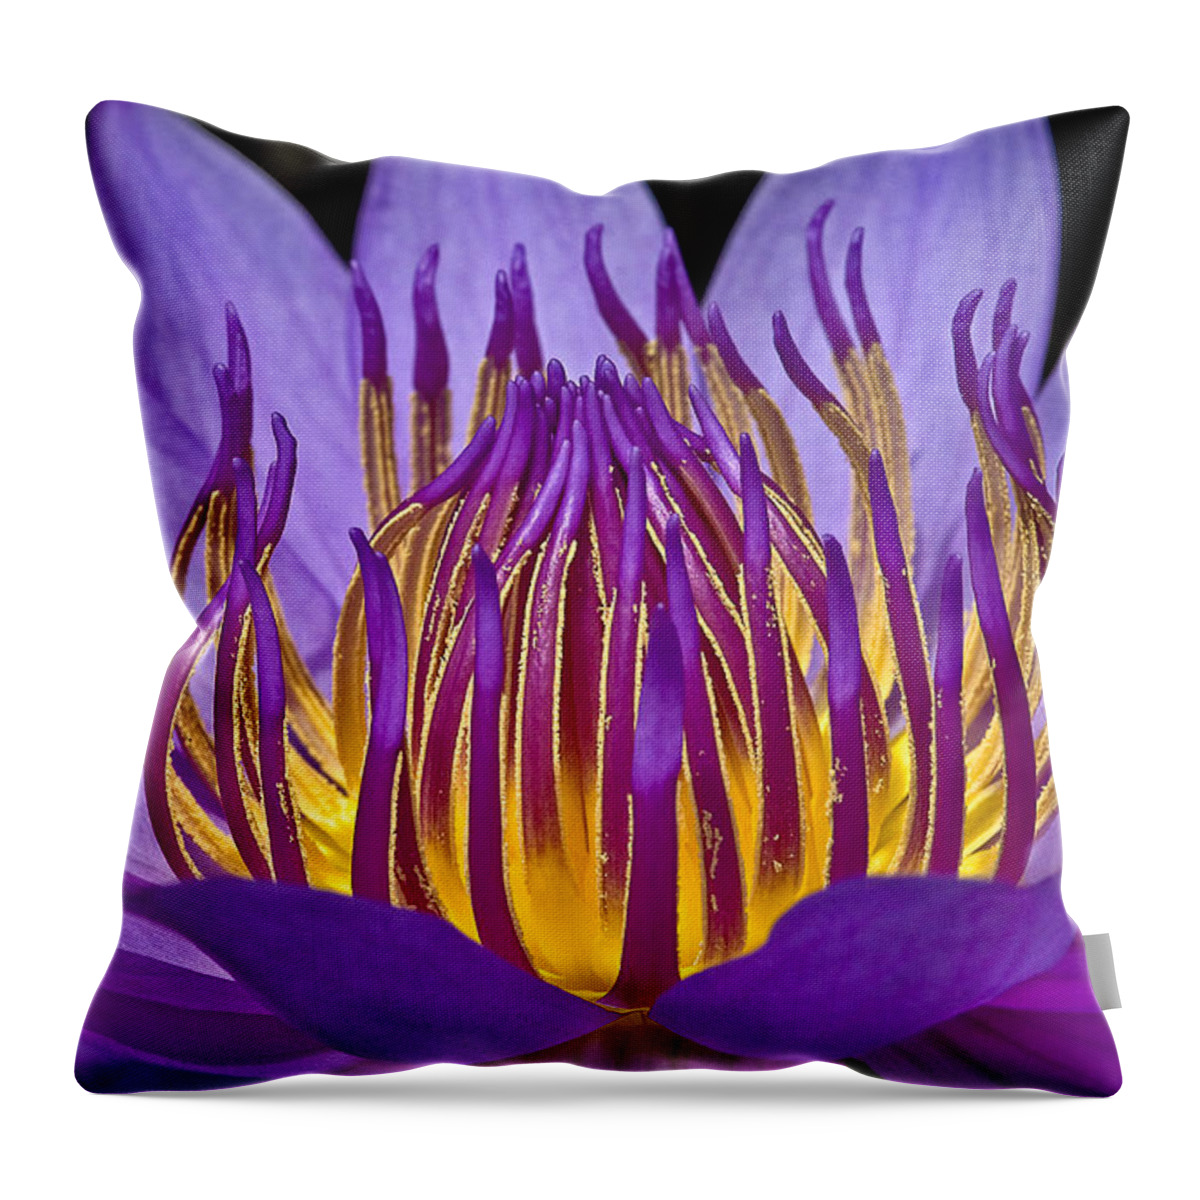 Waterlily Throw Pillow featuring the photograph Flaming Heart by Susan Candelario